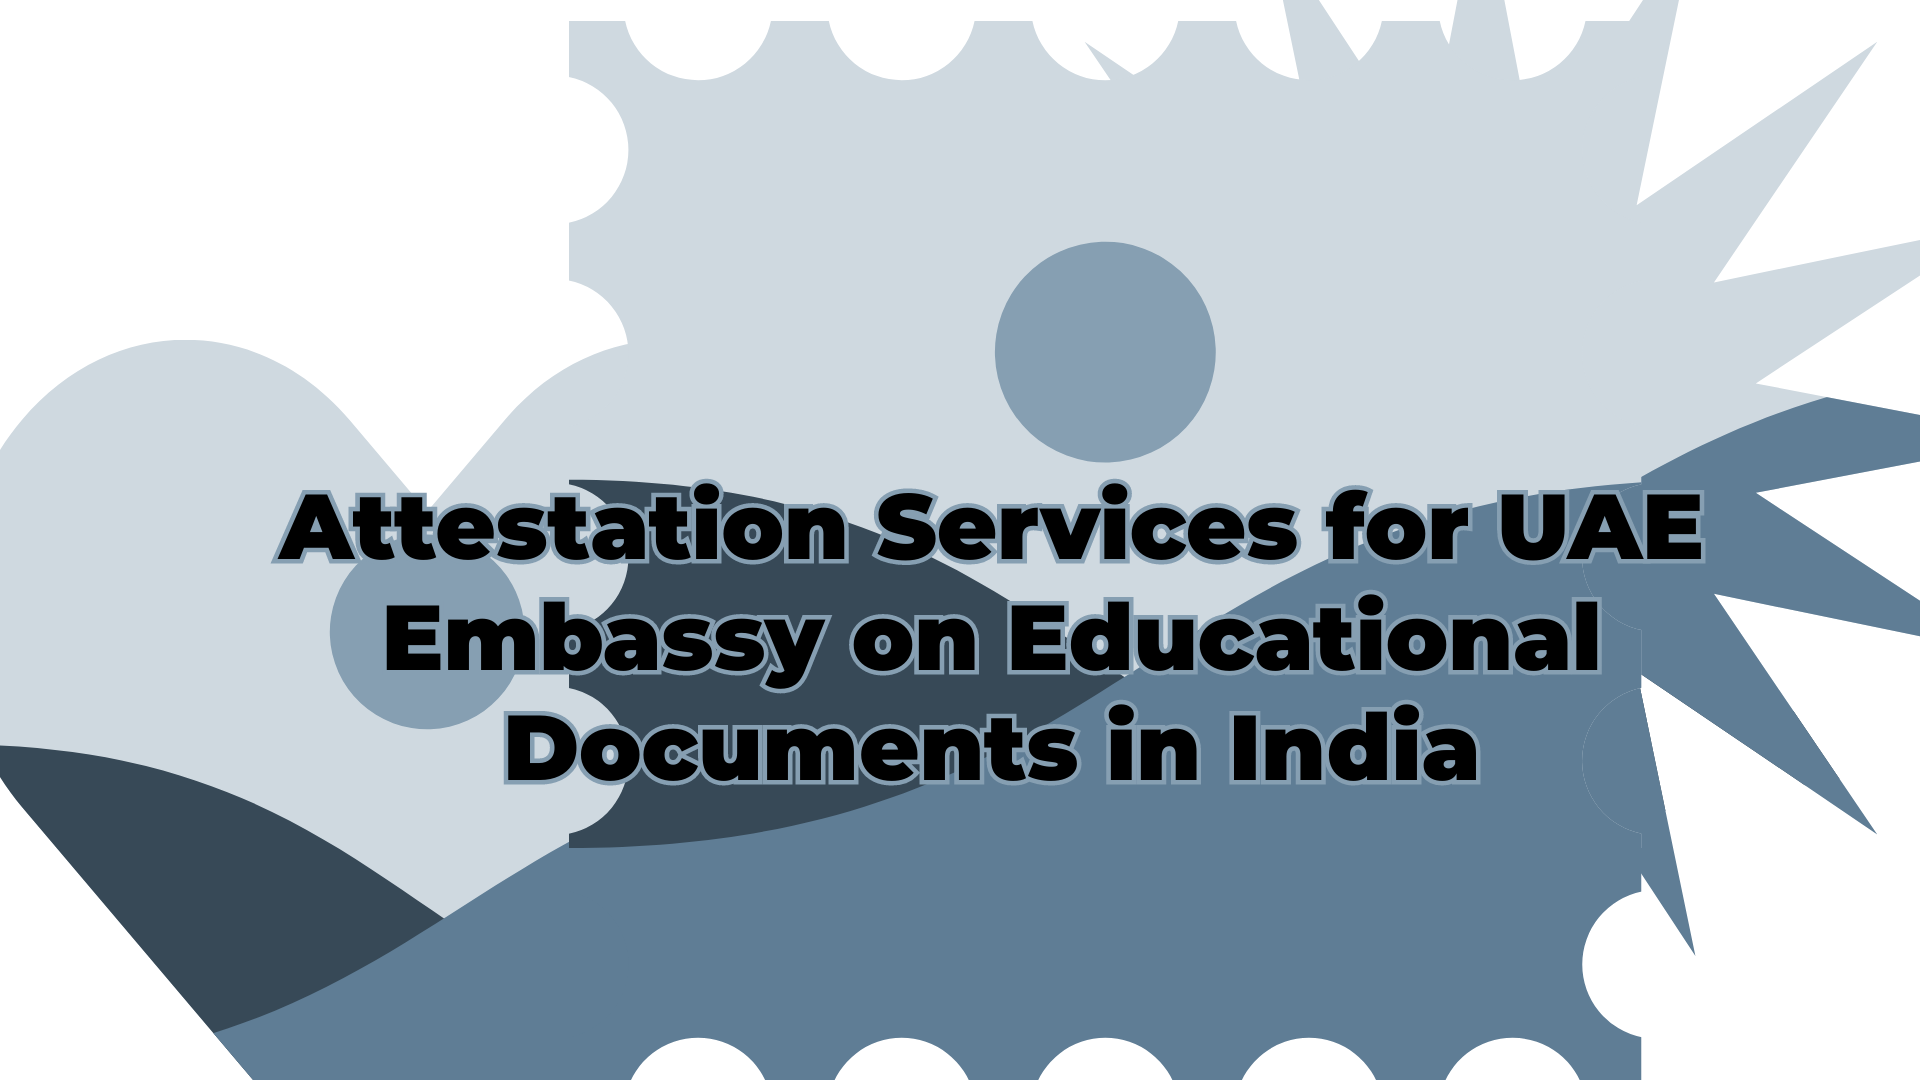 Attestation Services for UAE Embassy on Educational Documents in India